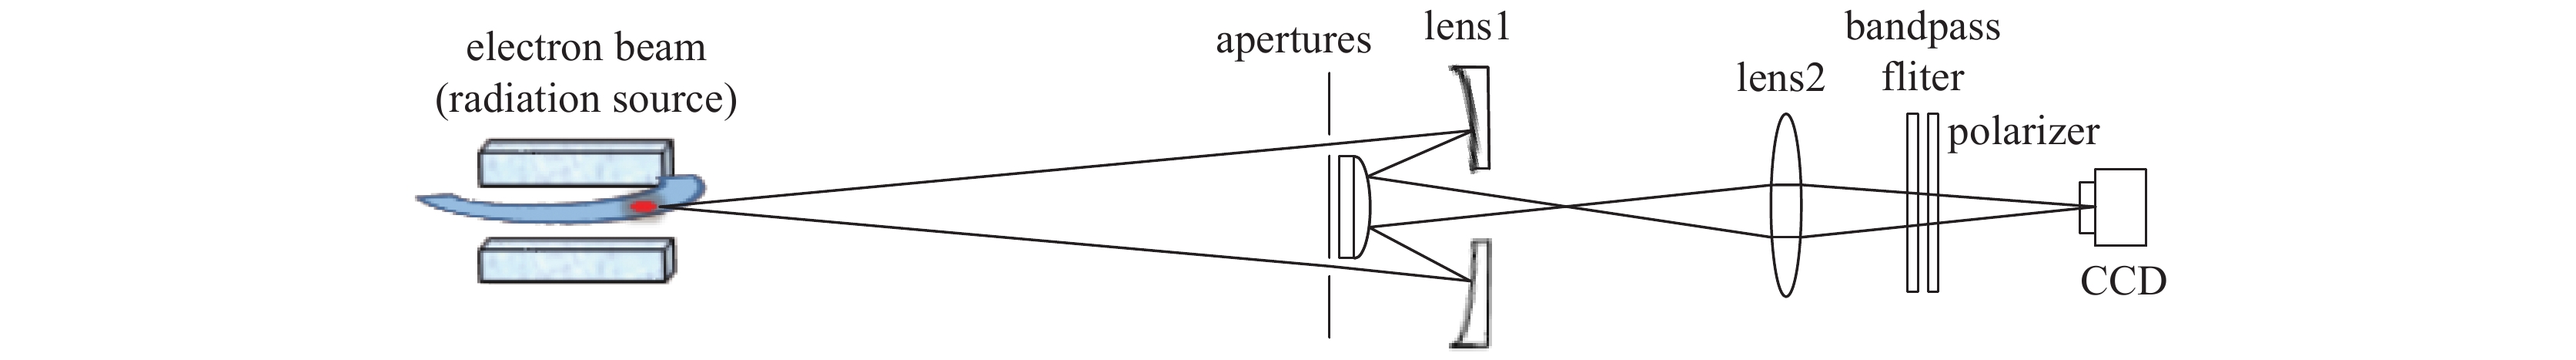 Schematic of the optical system of the interferometer